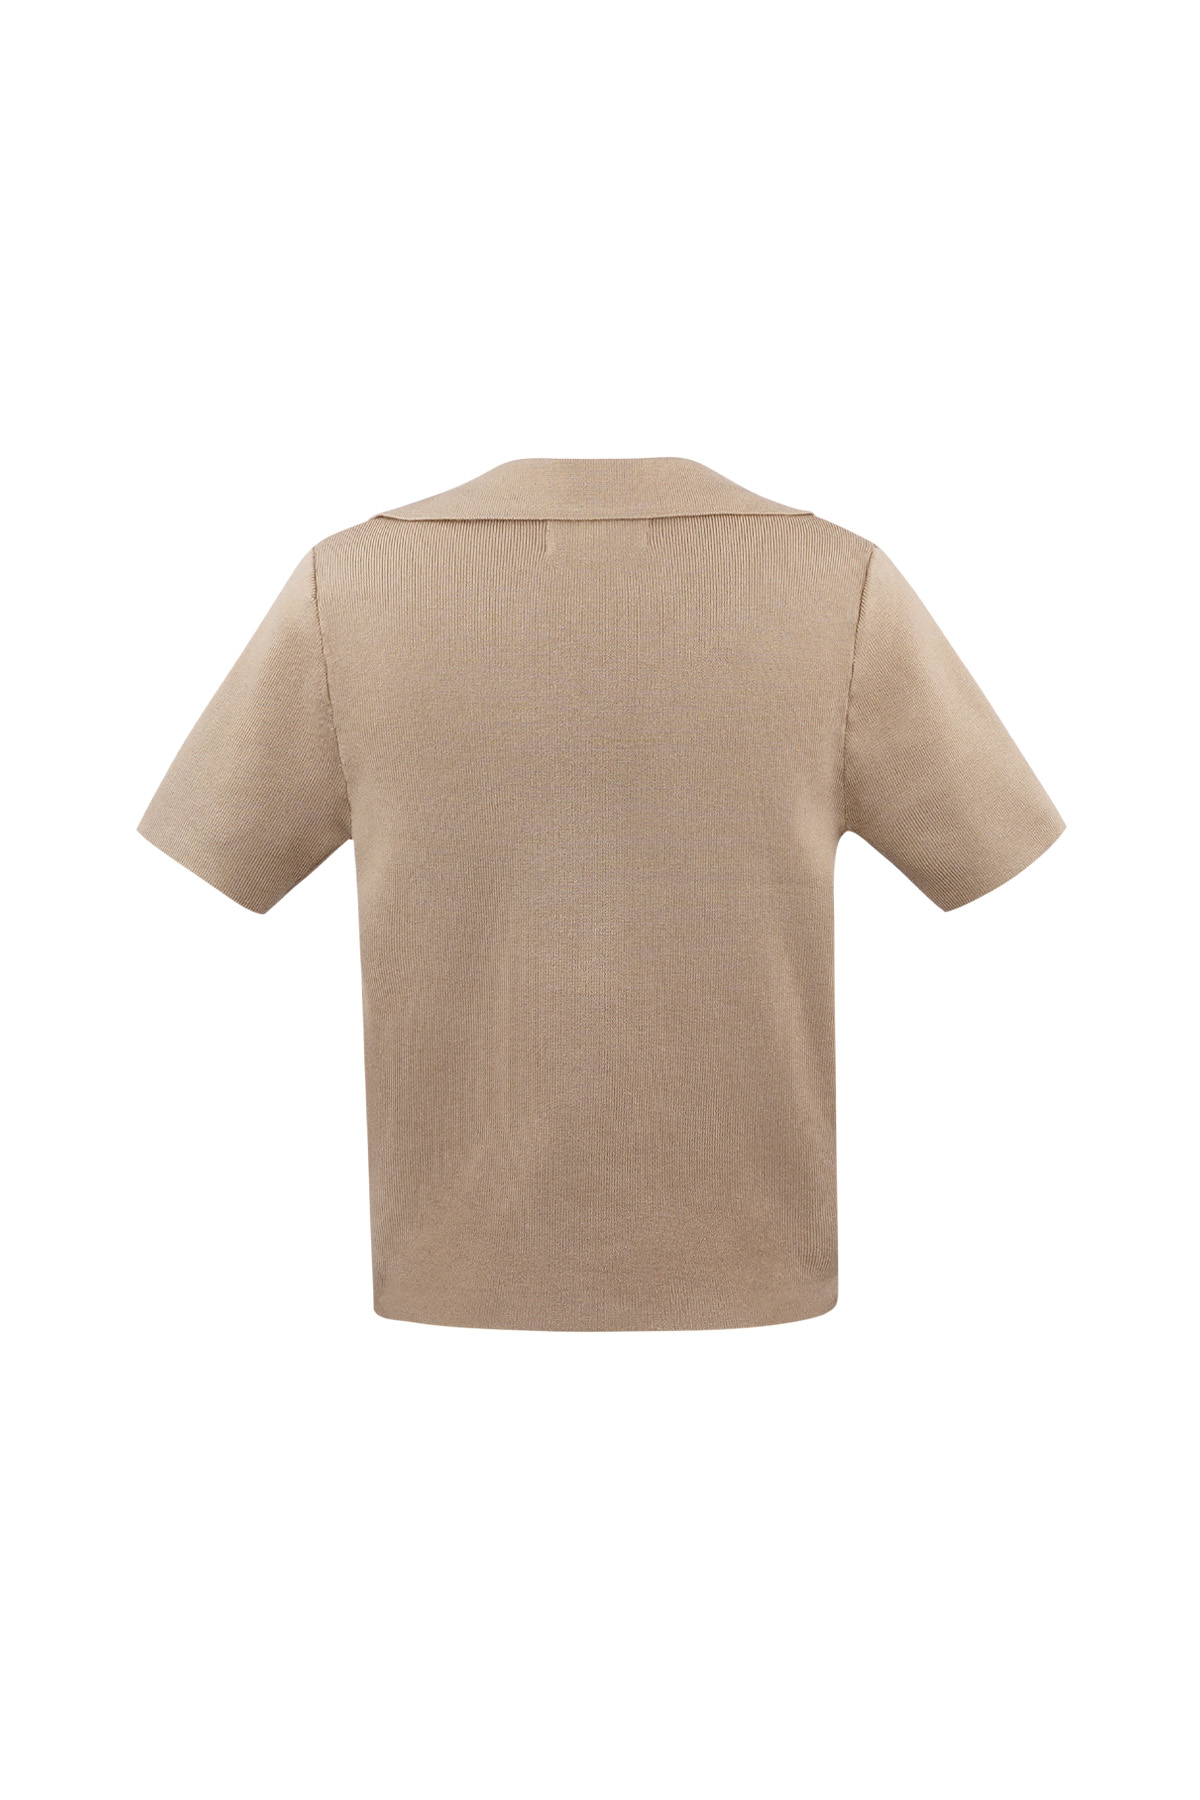 Polo demi-boutonné grand/extra large – beige Image7